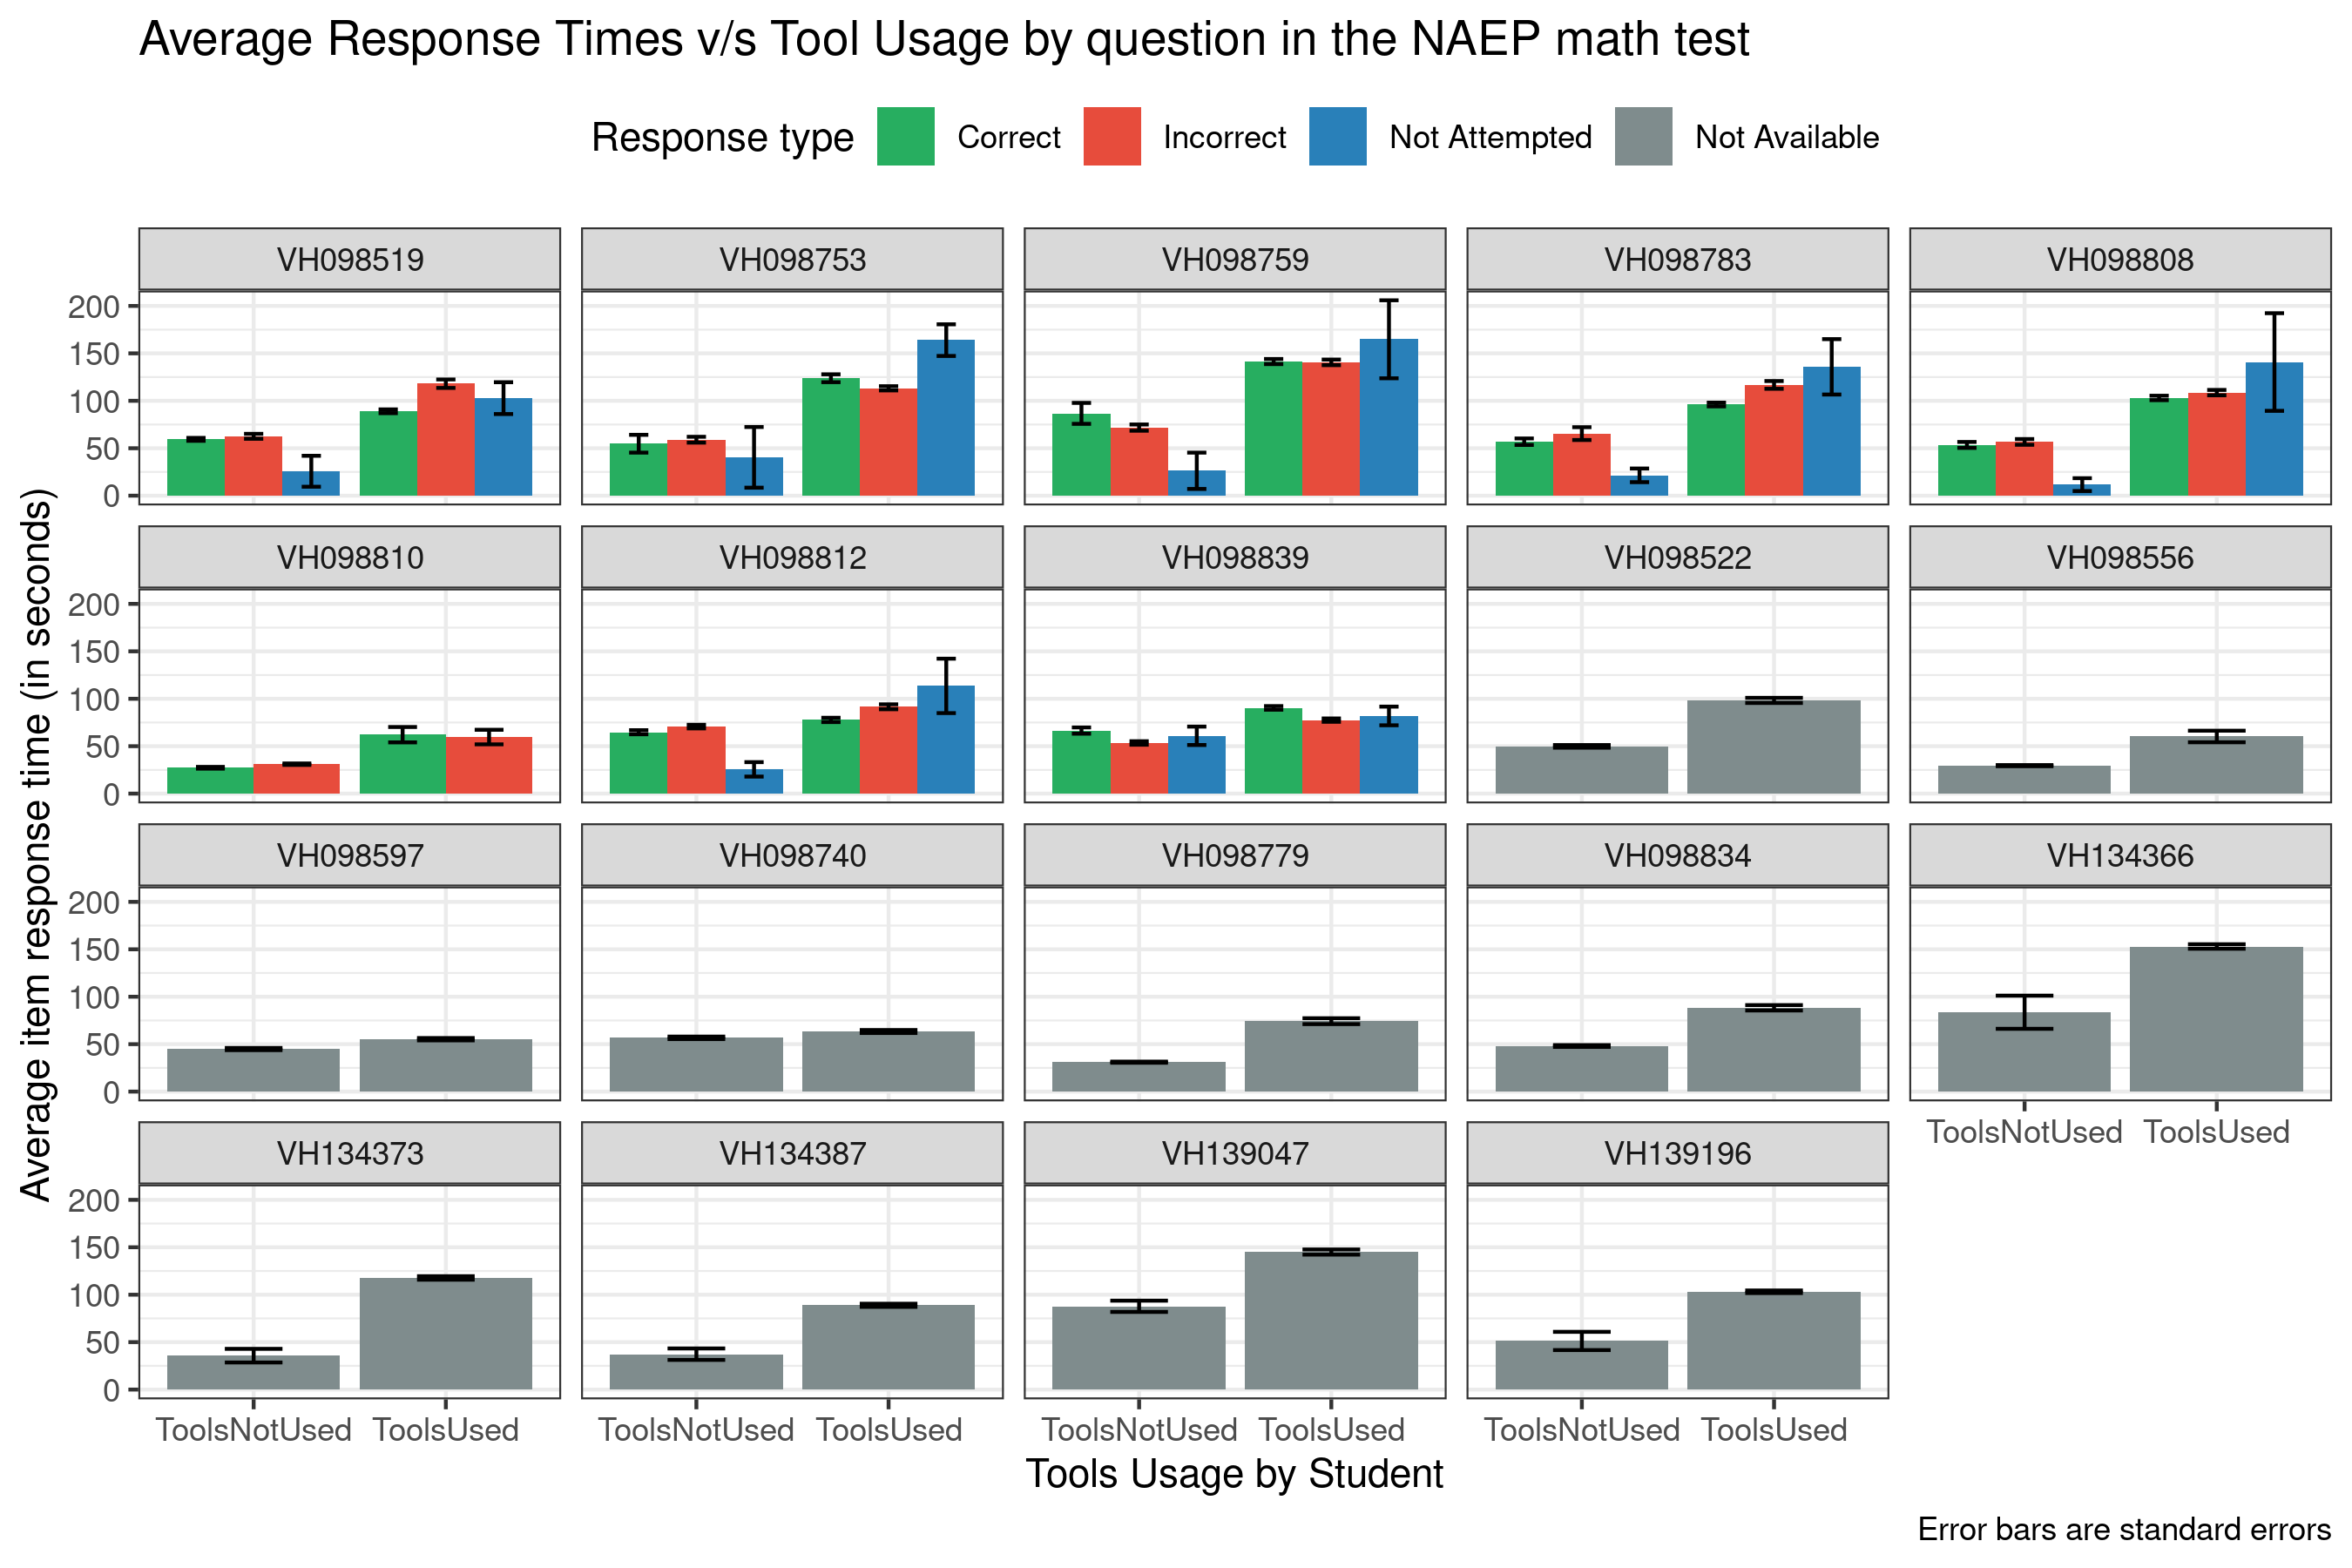 Comparison of item response times for students who used the digital tools and who did not use the digital tools